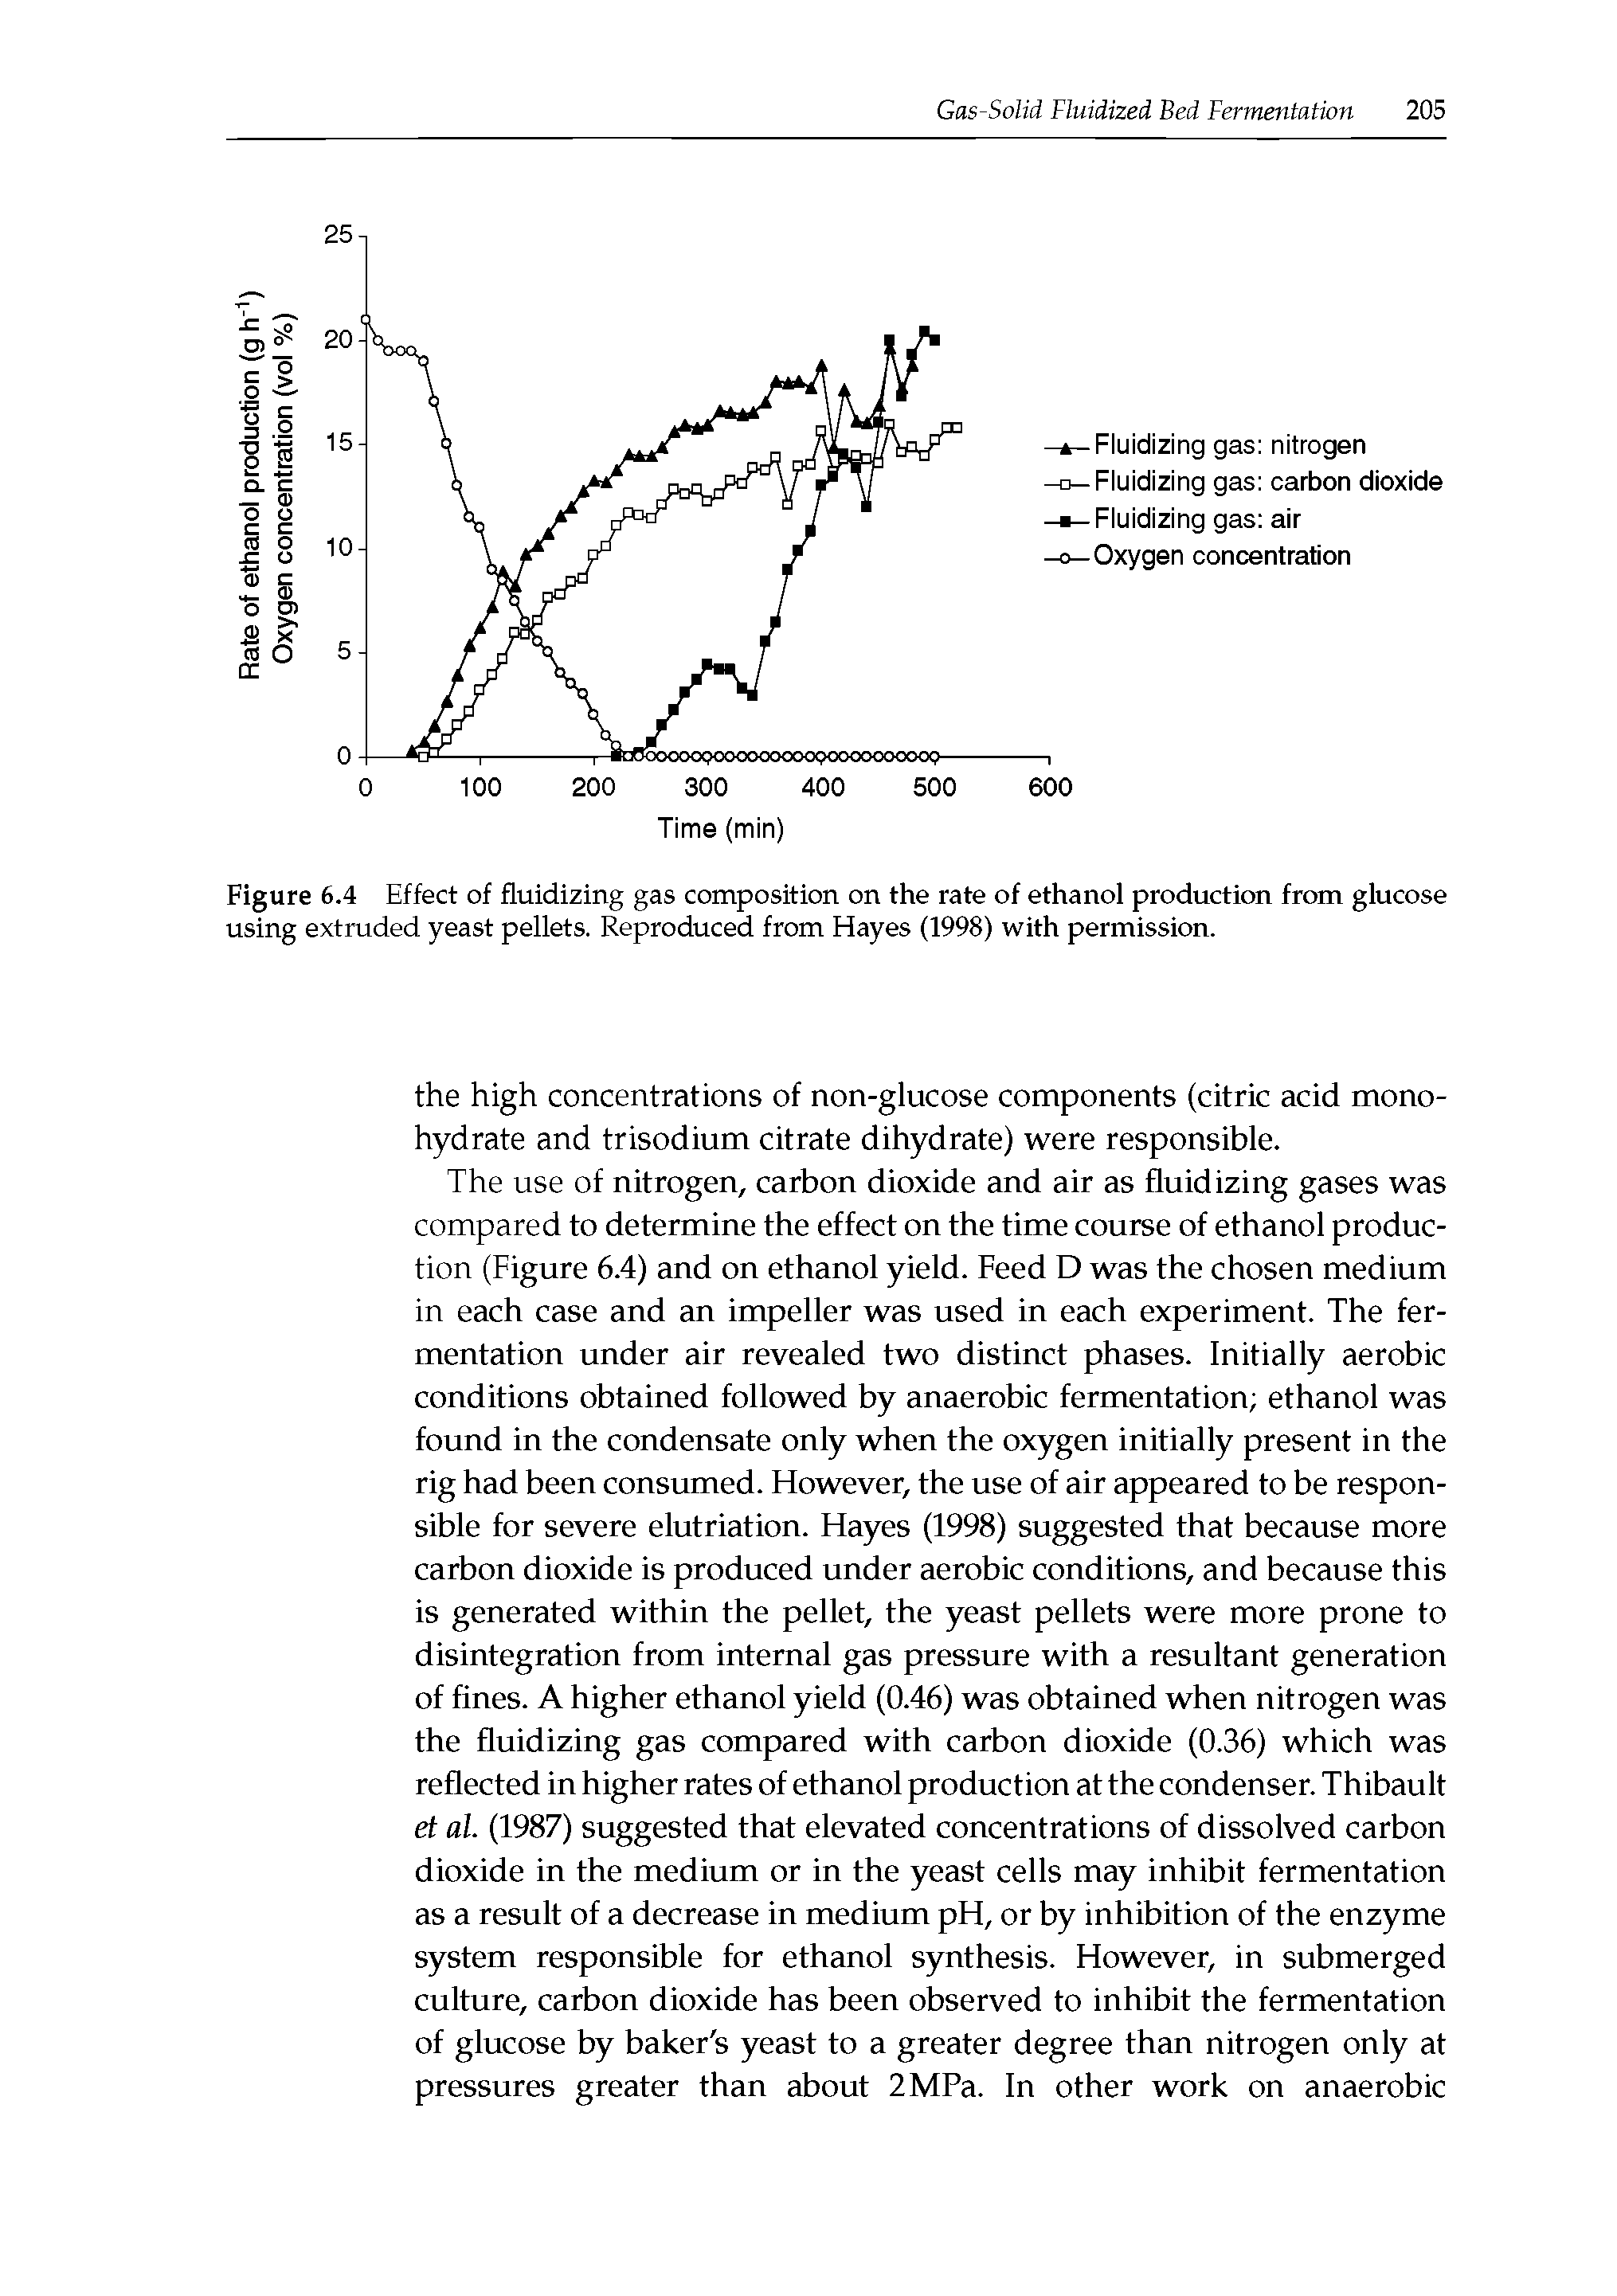 Figure 6.4 Effect of fluidizing gas composition on the rate of ethanol production from glucose using extruded yeast pellets. Reproduced from Hayes (1998) with permission.